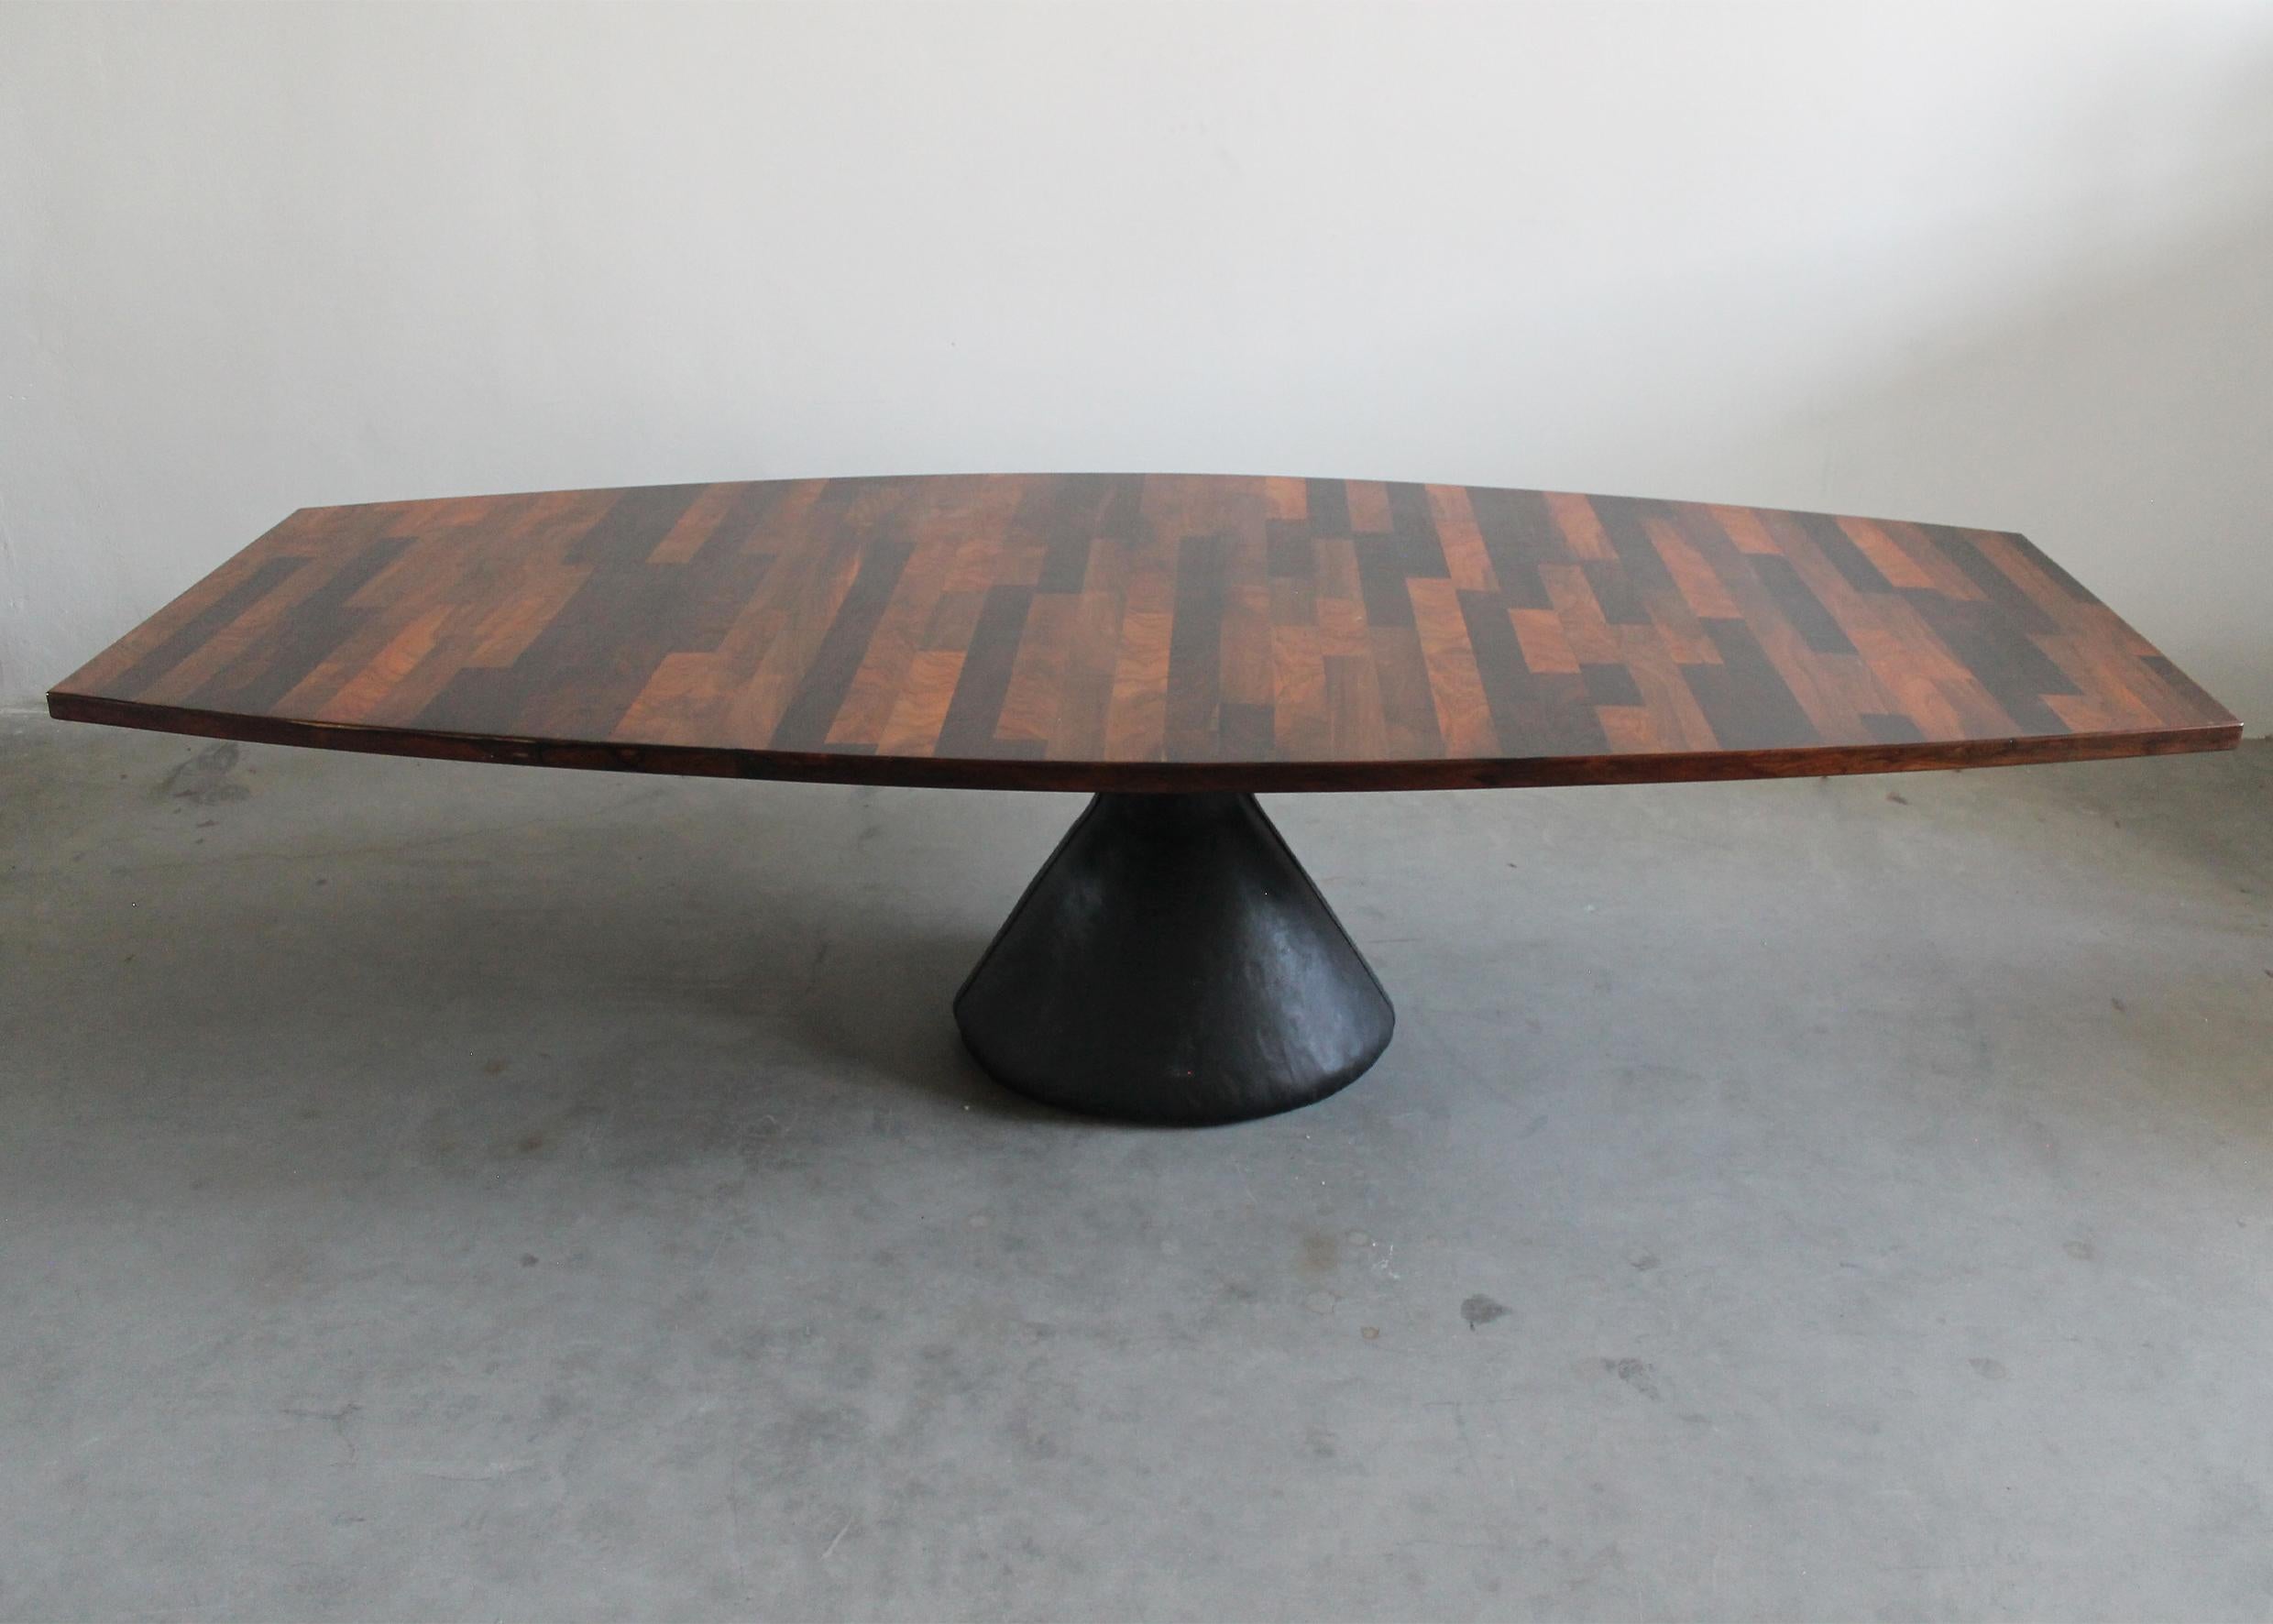 Large Guanabara pedestal conference table with an ovoidal shaped tabletop entirely realized in neroipè and jatoba wood which creates a beautiful patchwork effect (the idea of realizing a patchwork top came from the reuse of the left-over scraps of